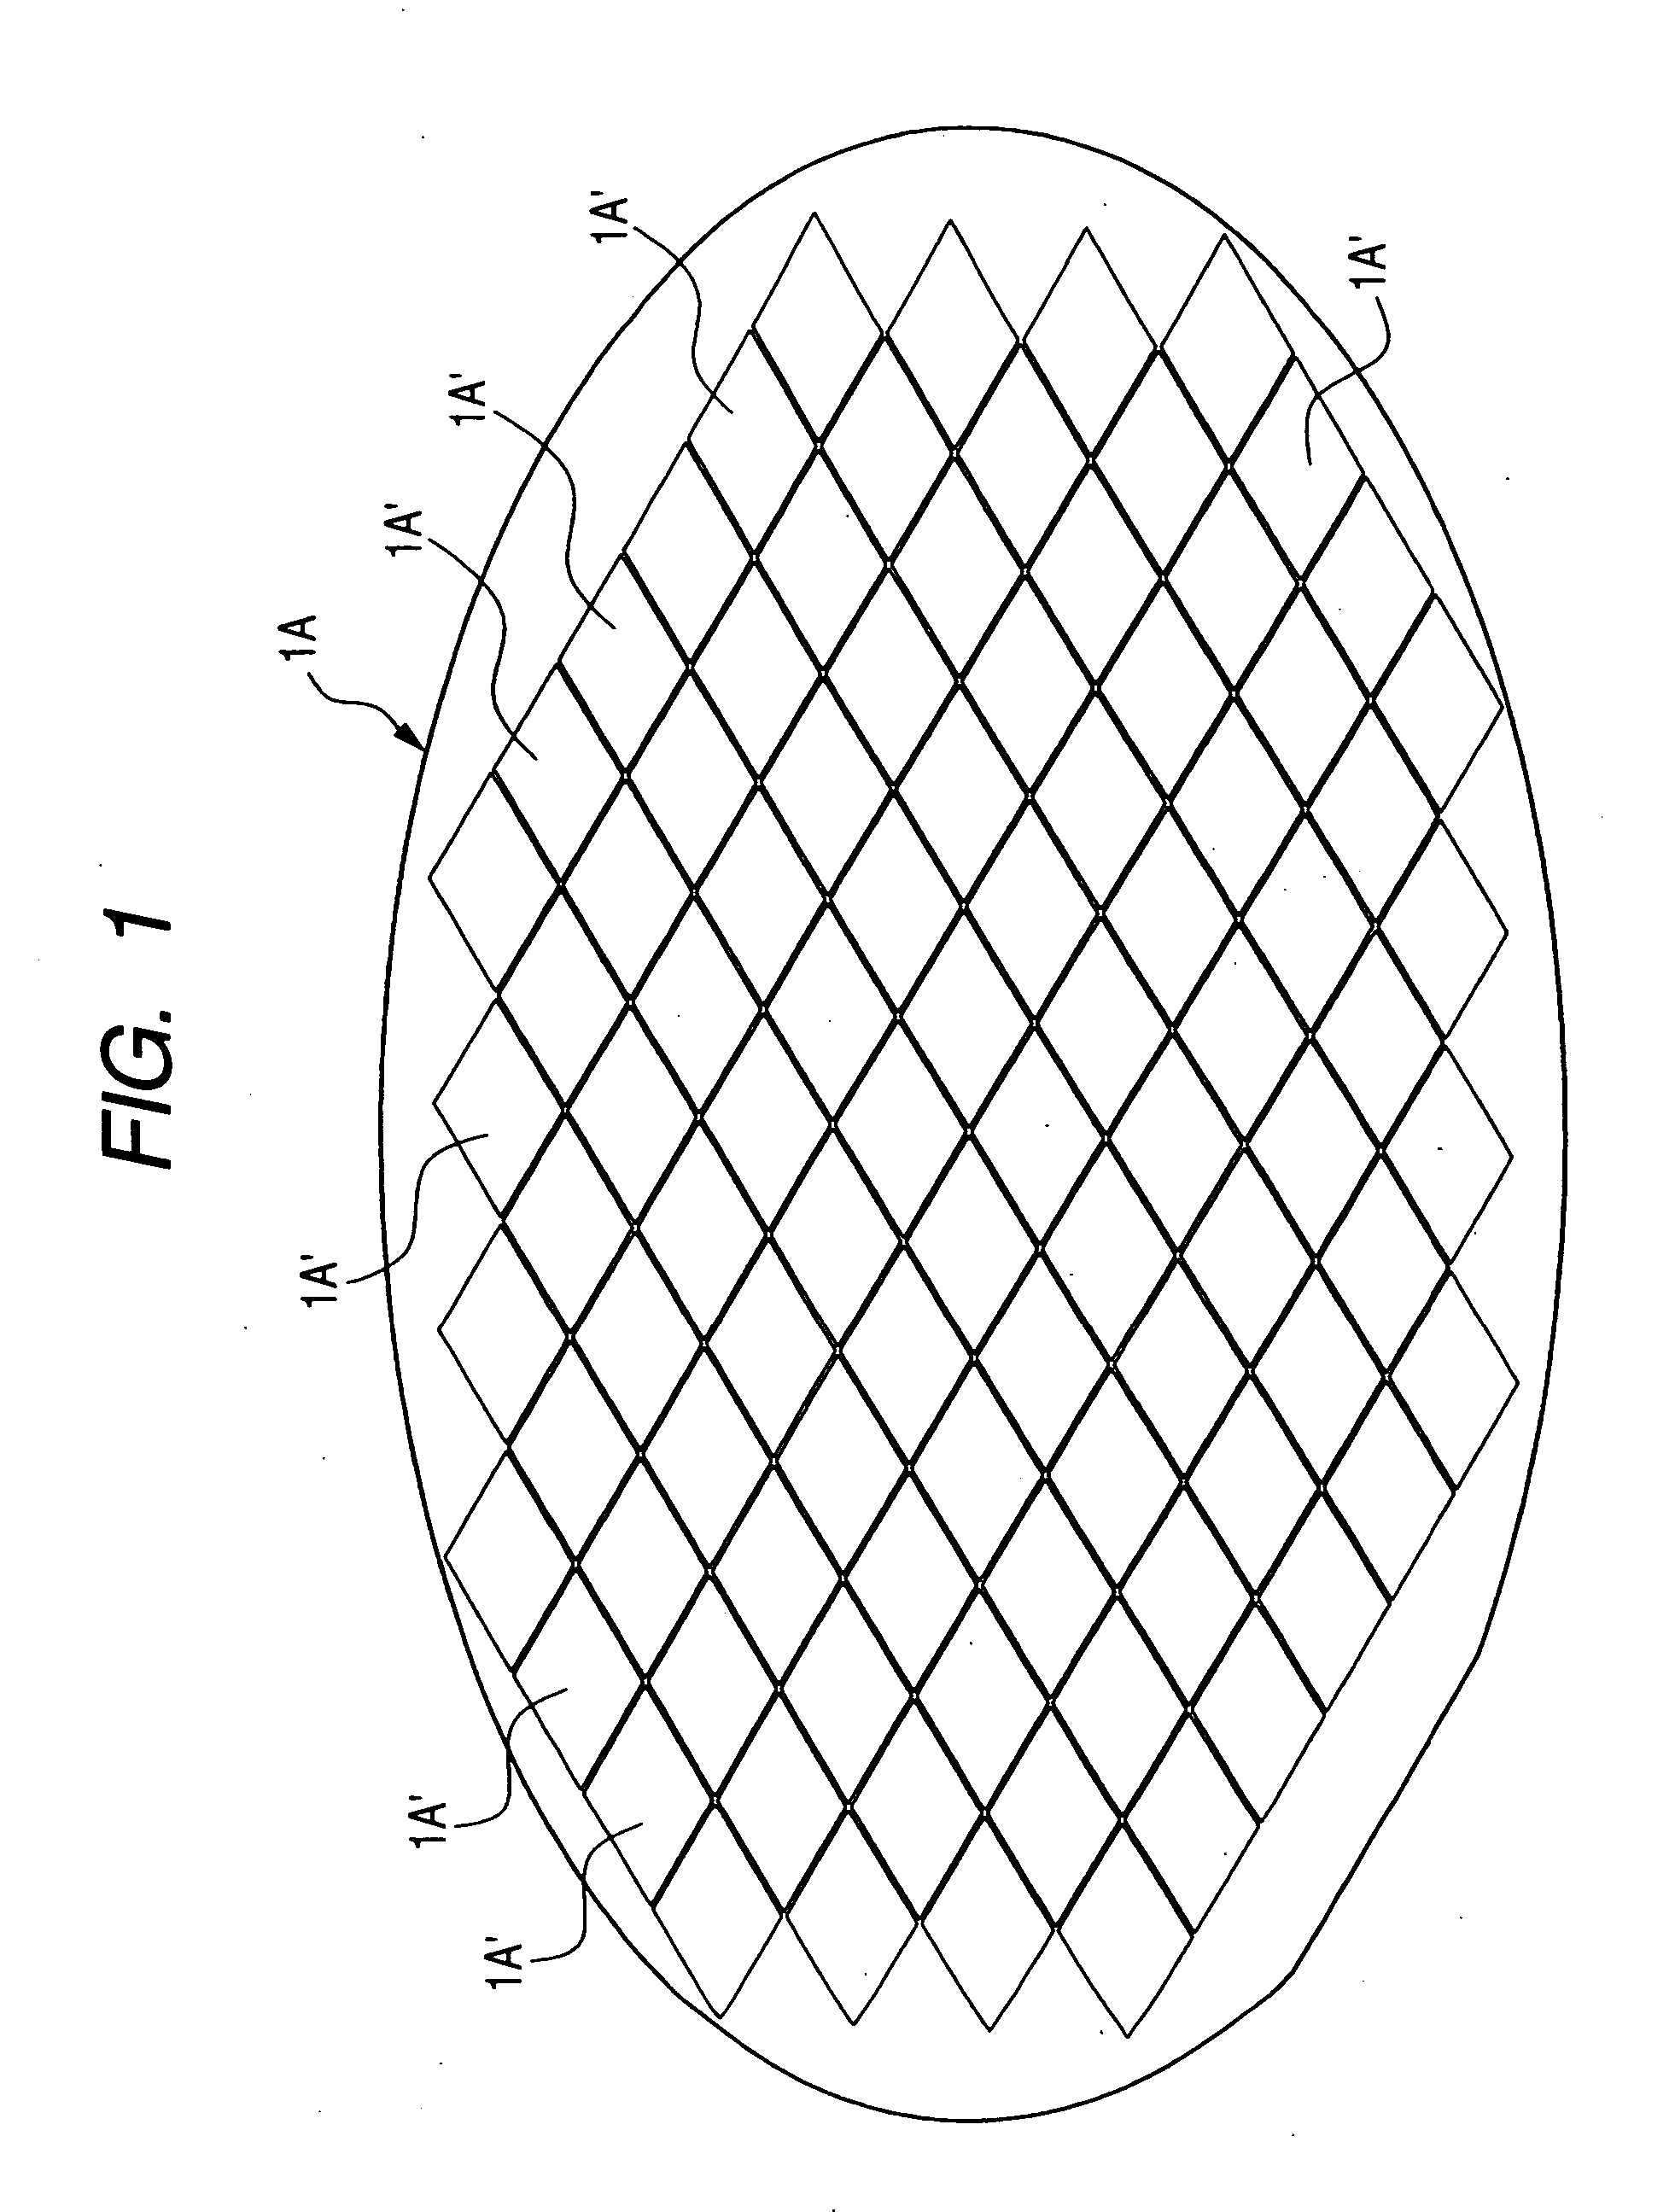 Semiconductor manufacturing method of die-pick-up from wafer